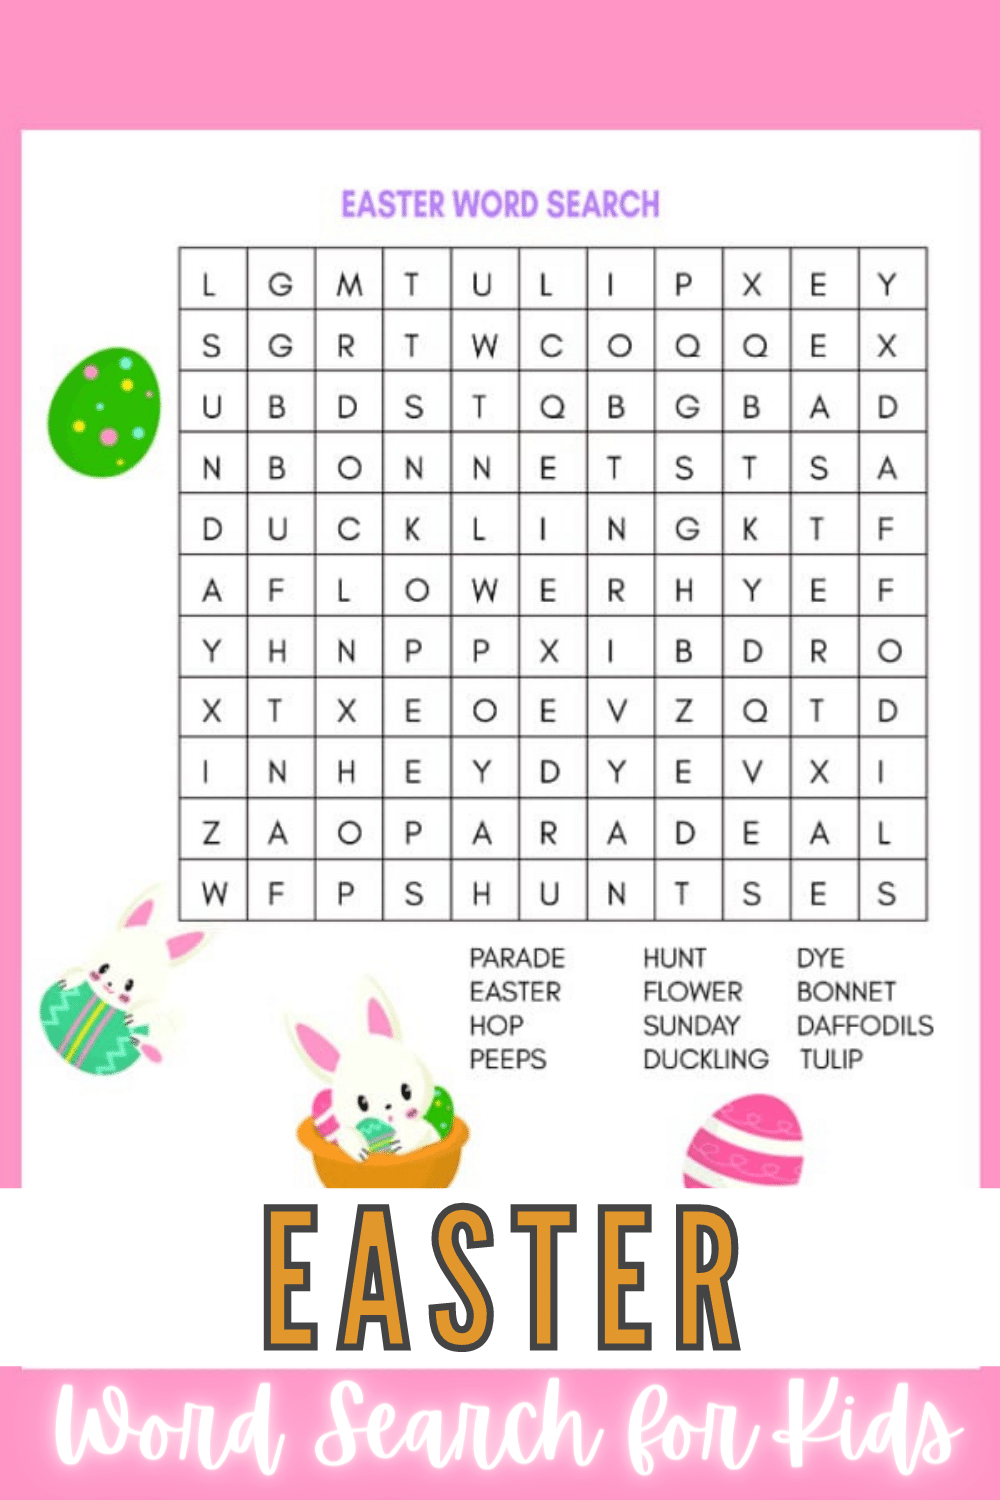 This printable Easter Word Search for Kids is a wonderful activity for kids. Full of Easter-themed words, it is educational and fun. #printables #wordsearch #Easter via @wondermomwannab